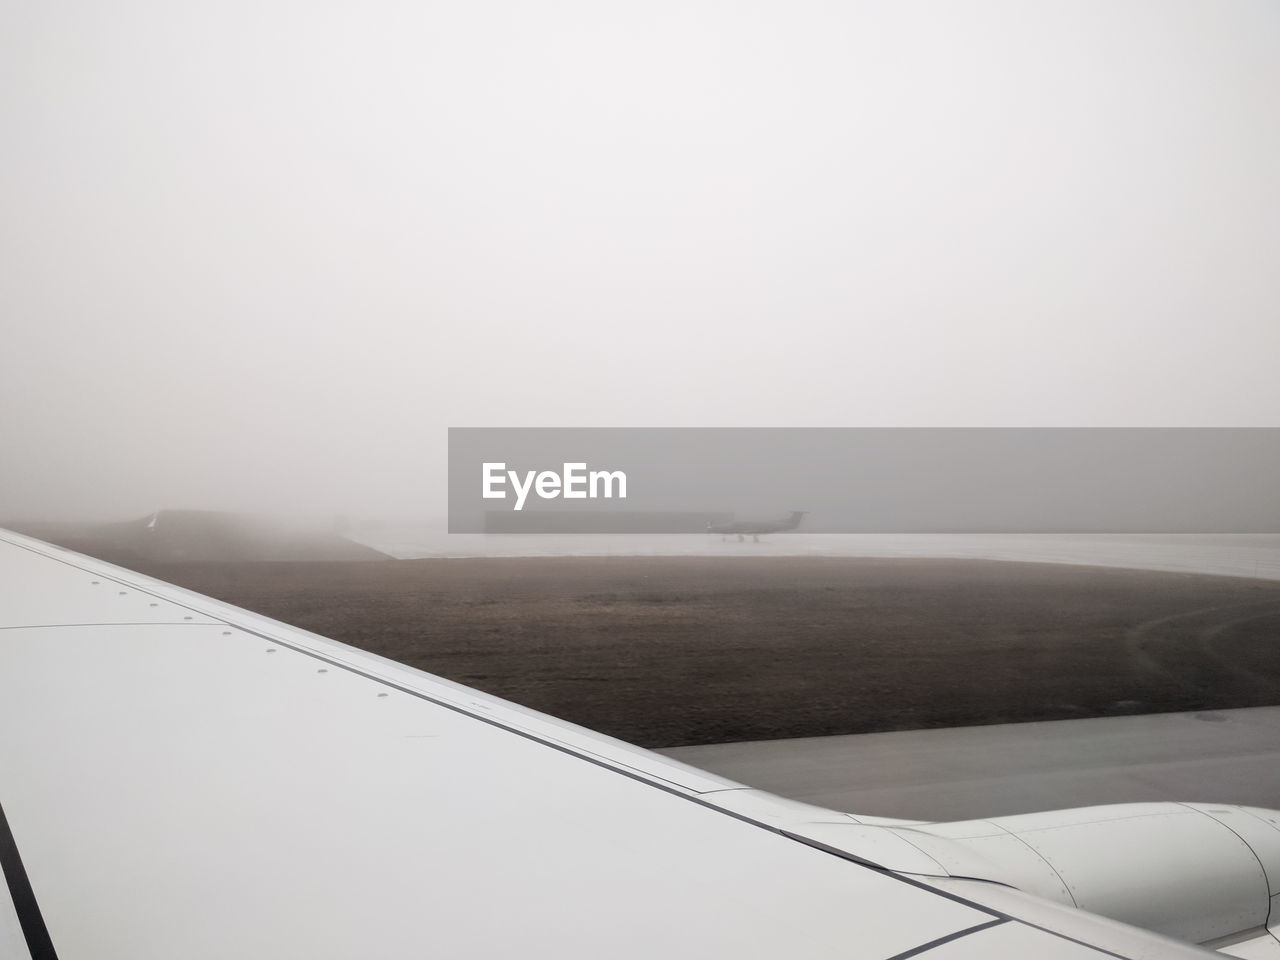 Cropped image of airplane against sky during foggy weather